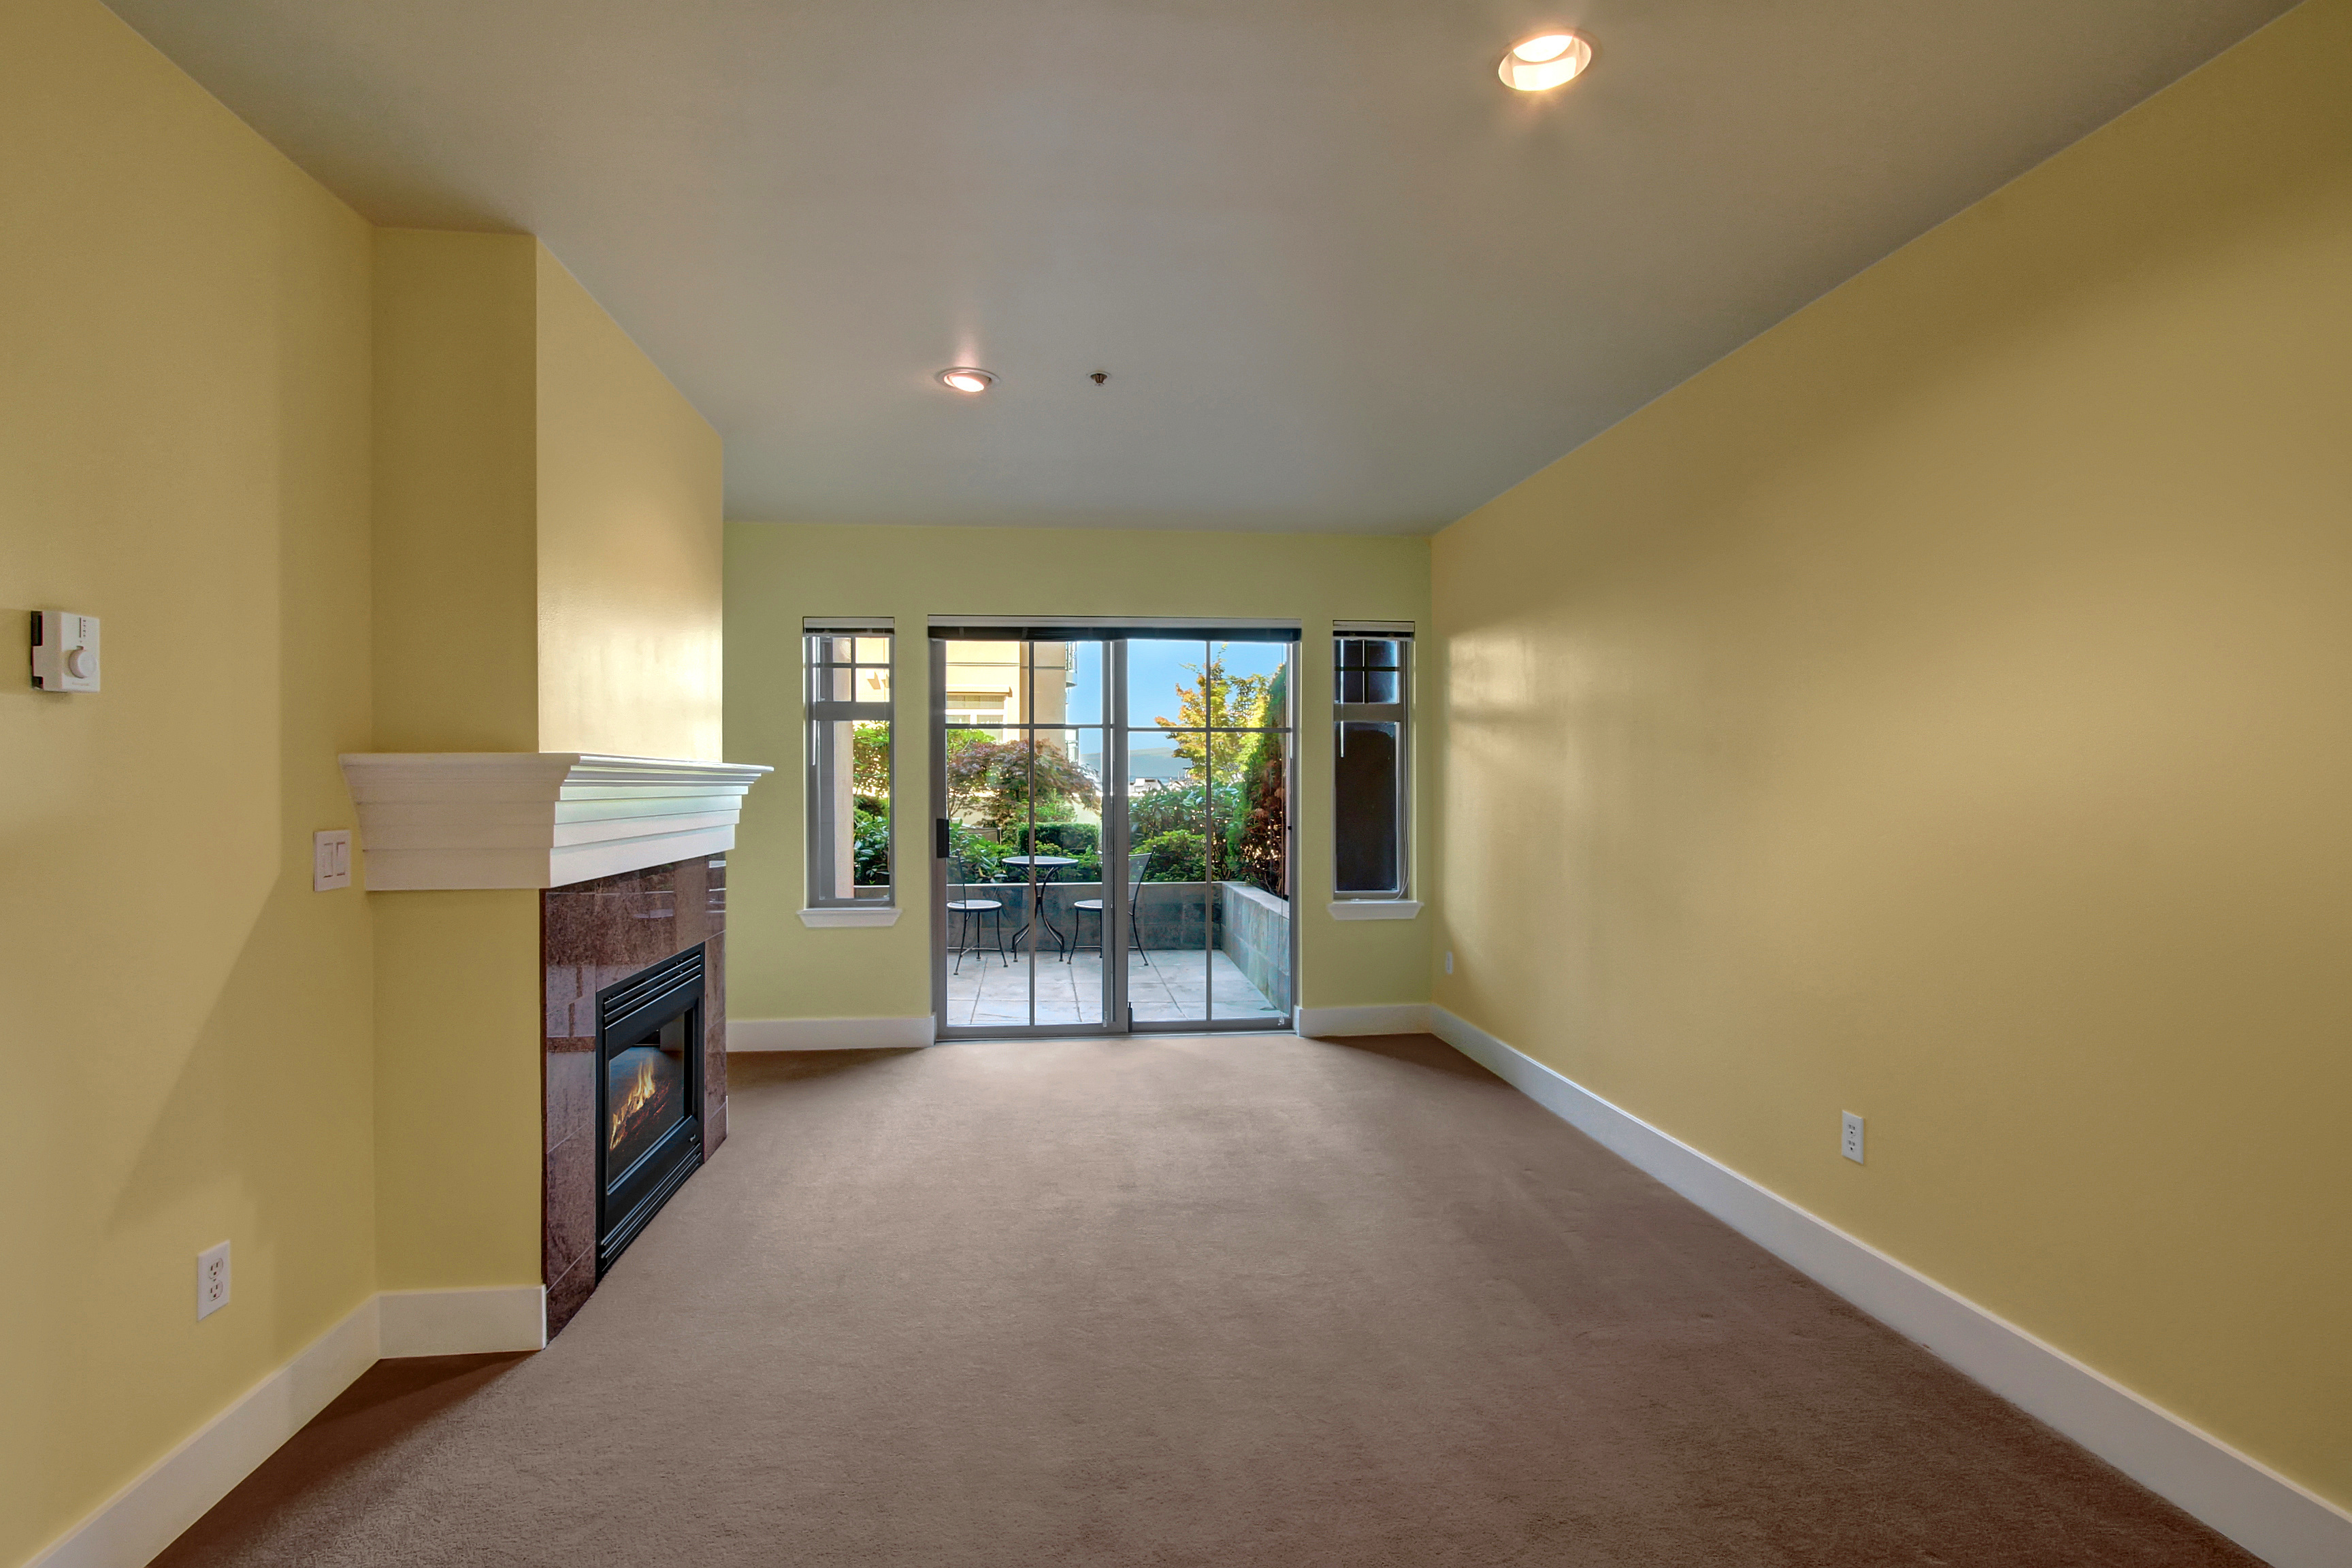 Property Photo: Living room 123 Queen Anne Ave N 206  WA 98109 